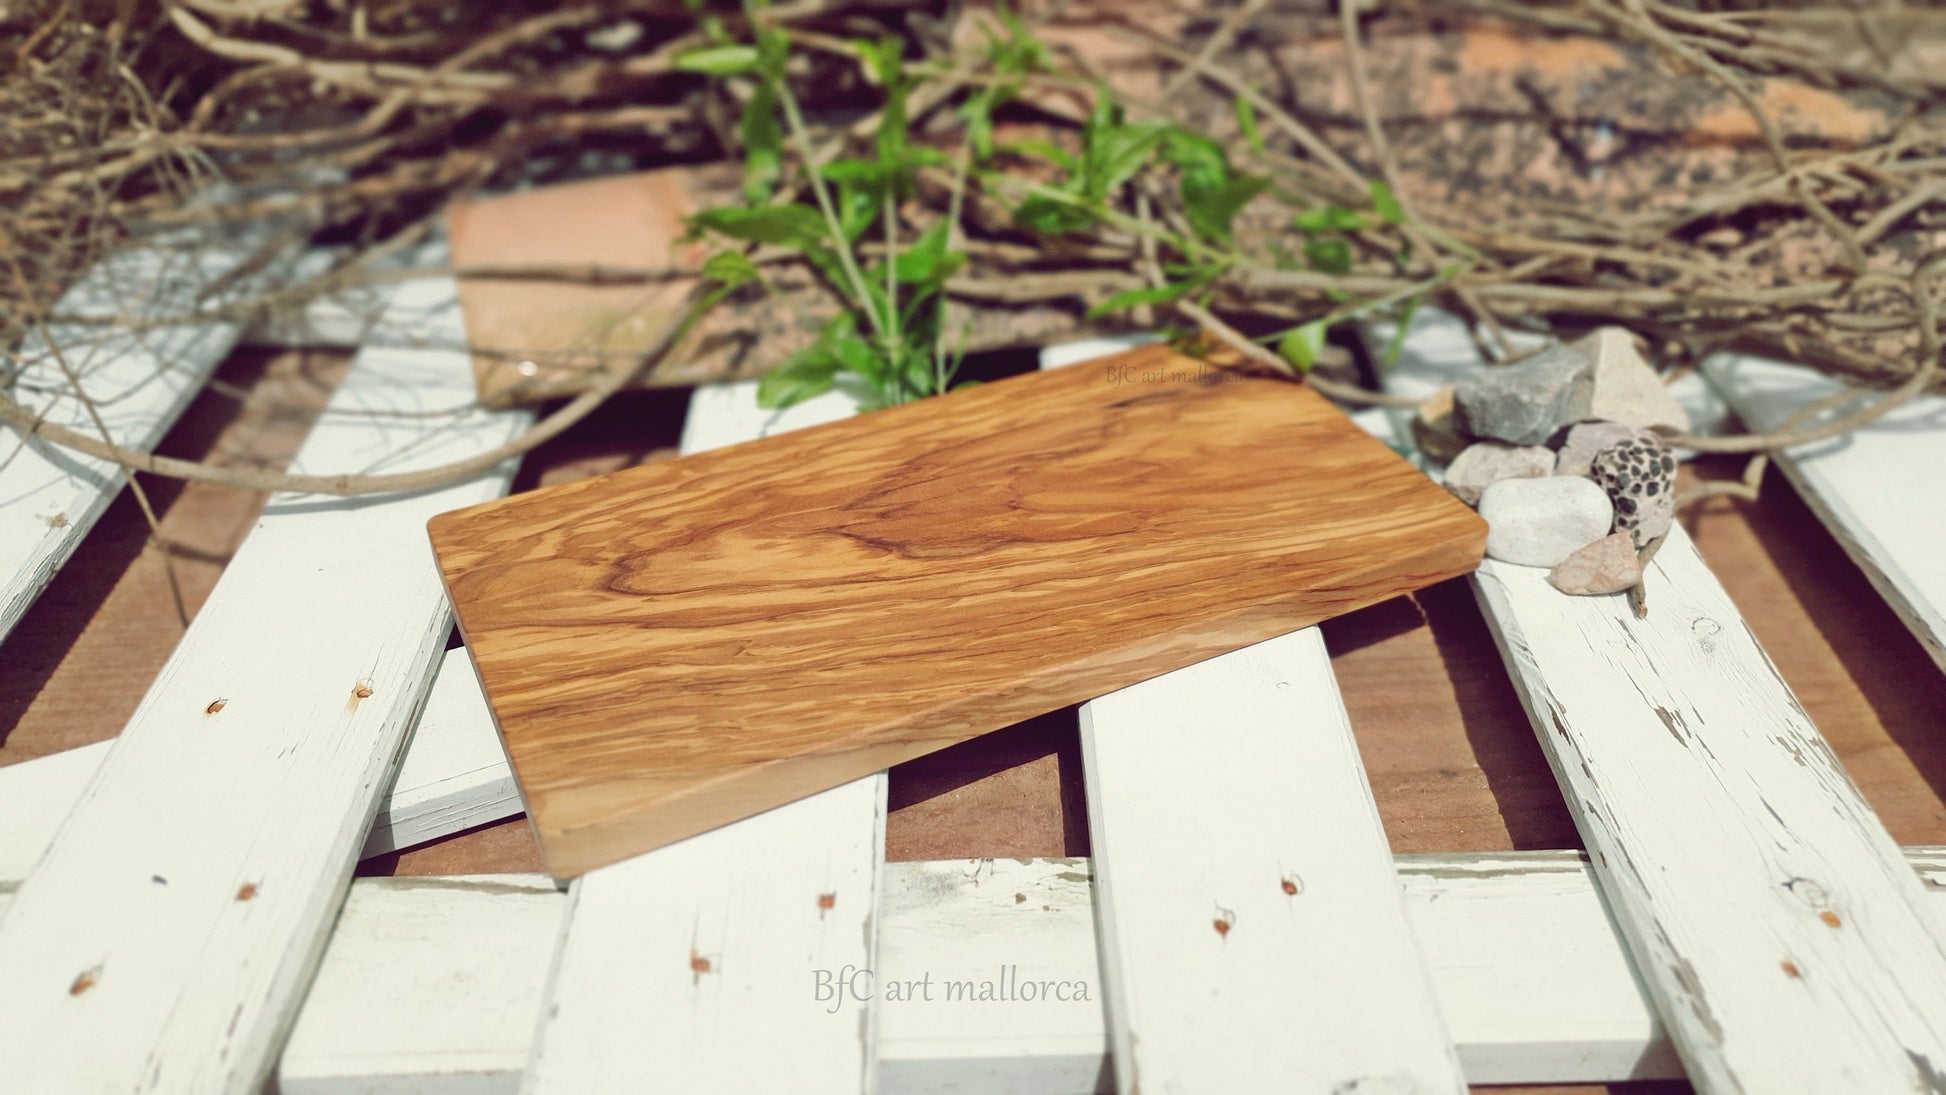 Olive Wood Cutting Board For Kitchen , Charcuterie Board Large, Handmade Kitchen Board, Rustic Kitchen Cutter Small, Table Serving Tray Wood